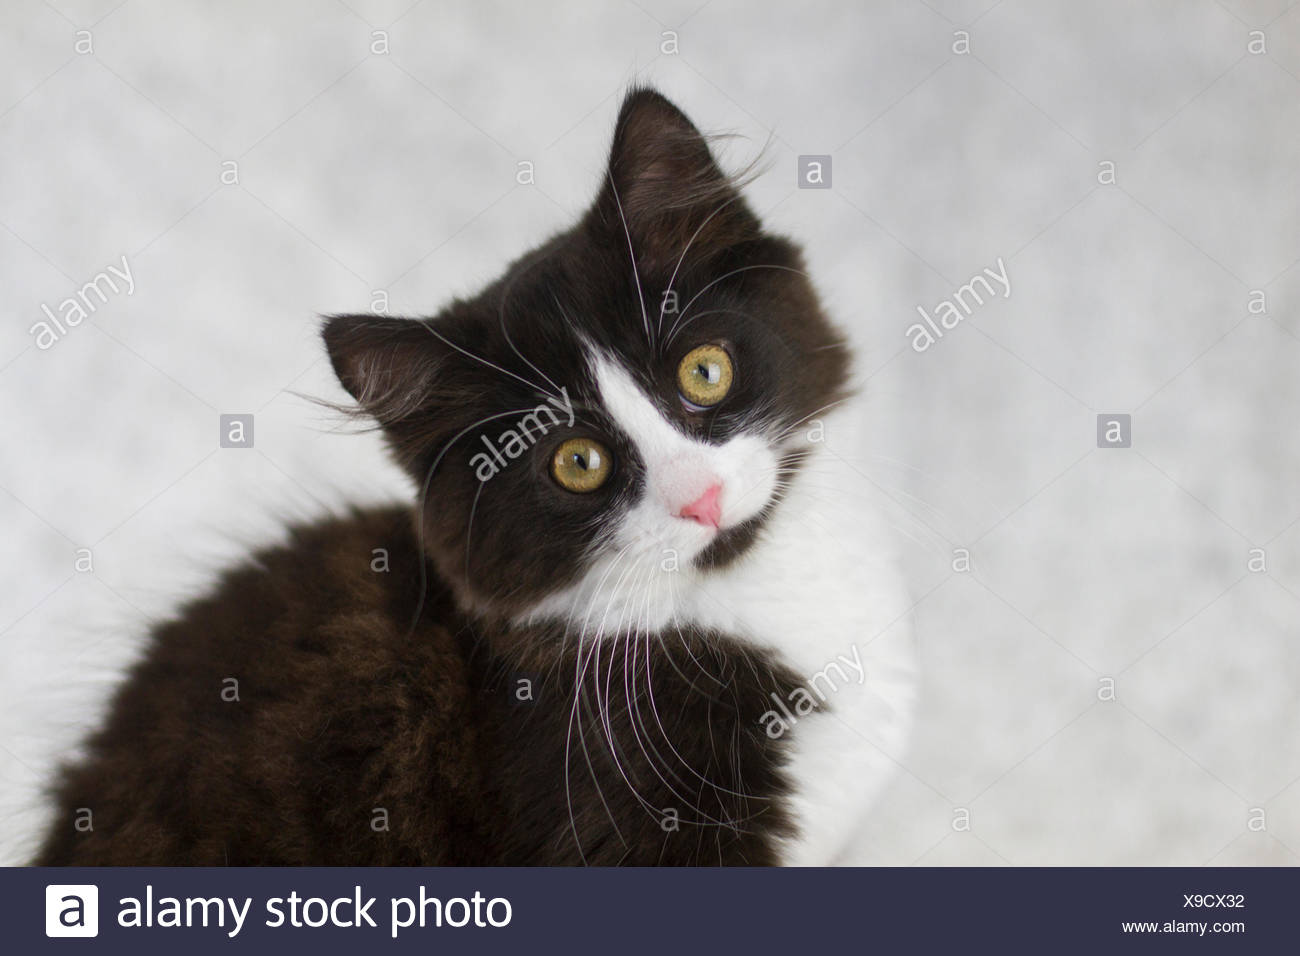 European Shorthair Black And White Kitten Looking Into The Camera Studio Picture Stock Photo Alamy